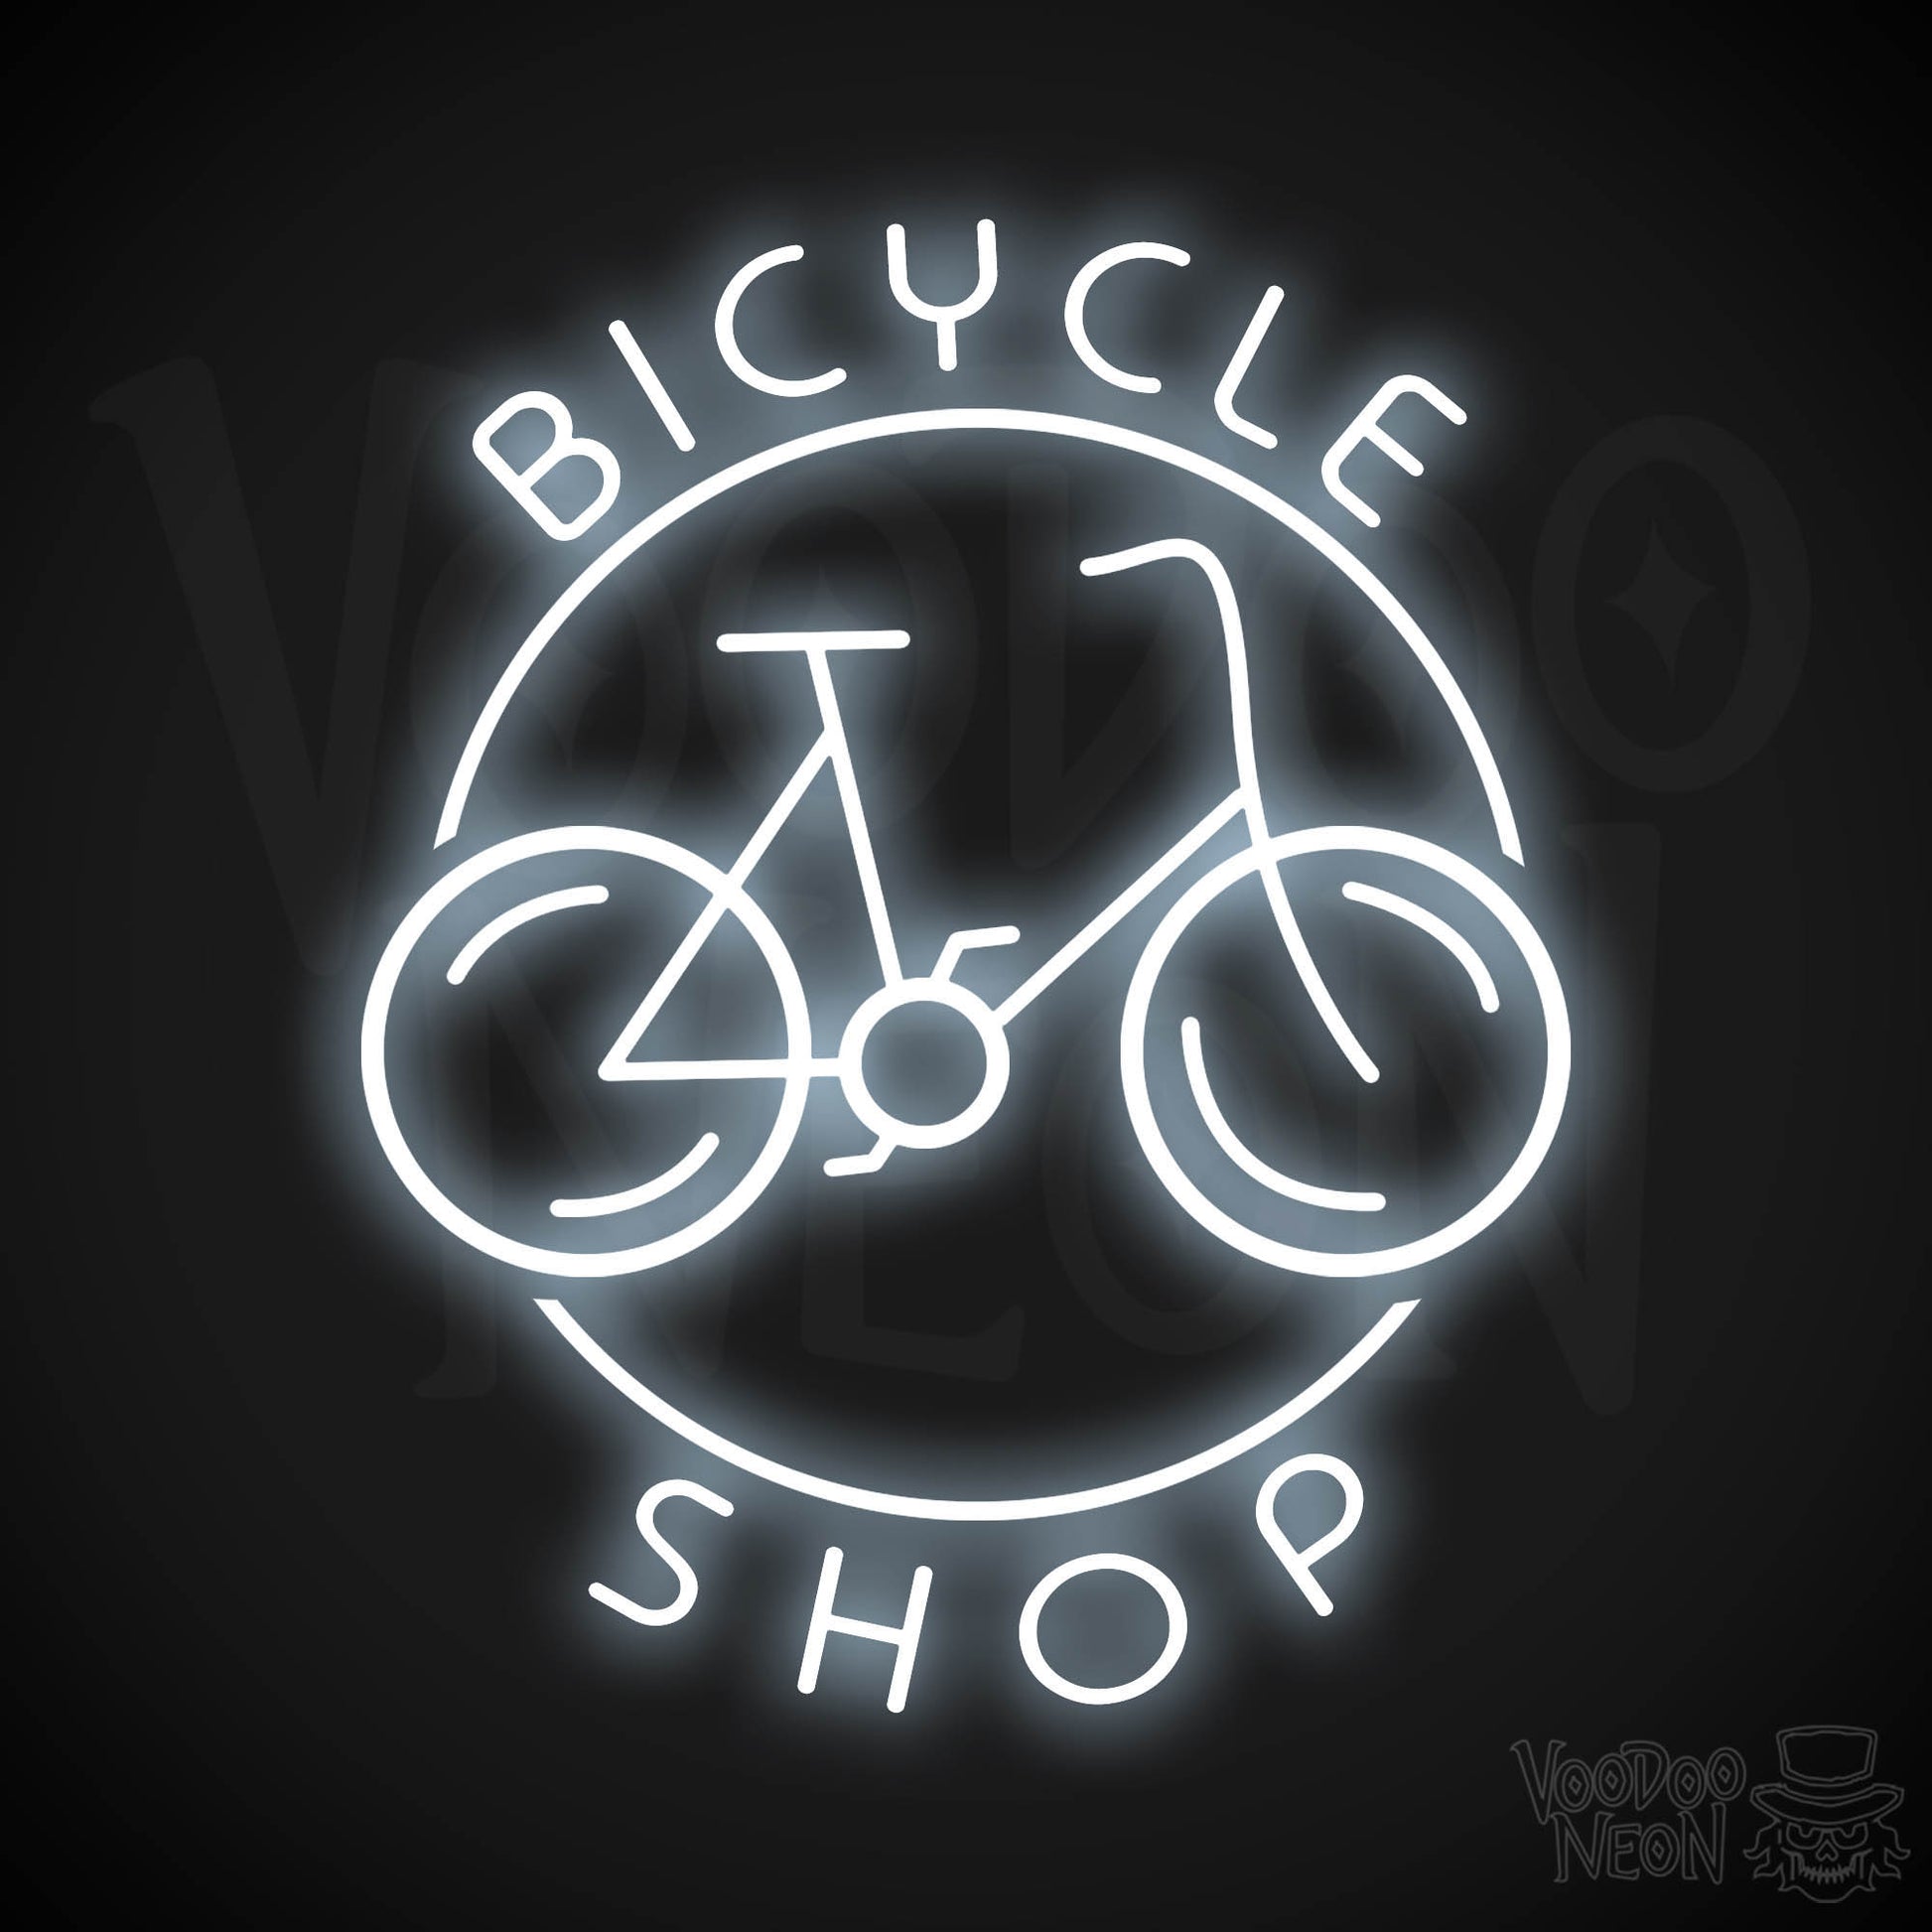 Bicycle Shop LED Neon - Cool White